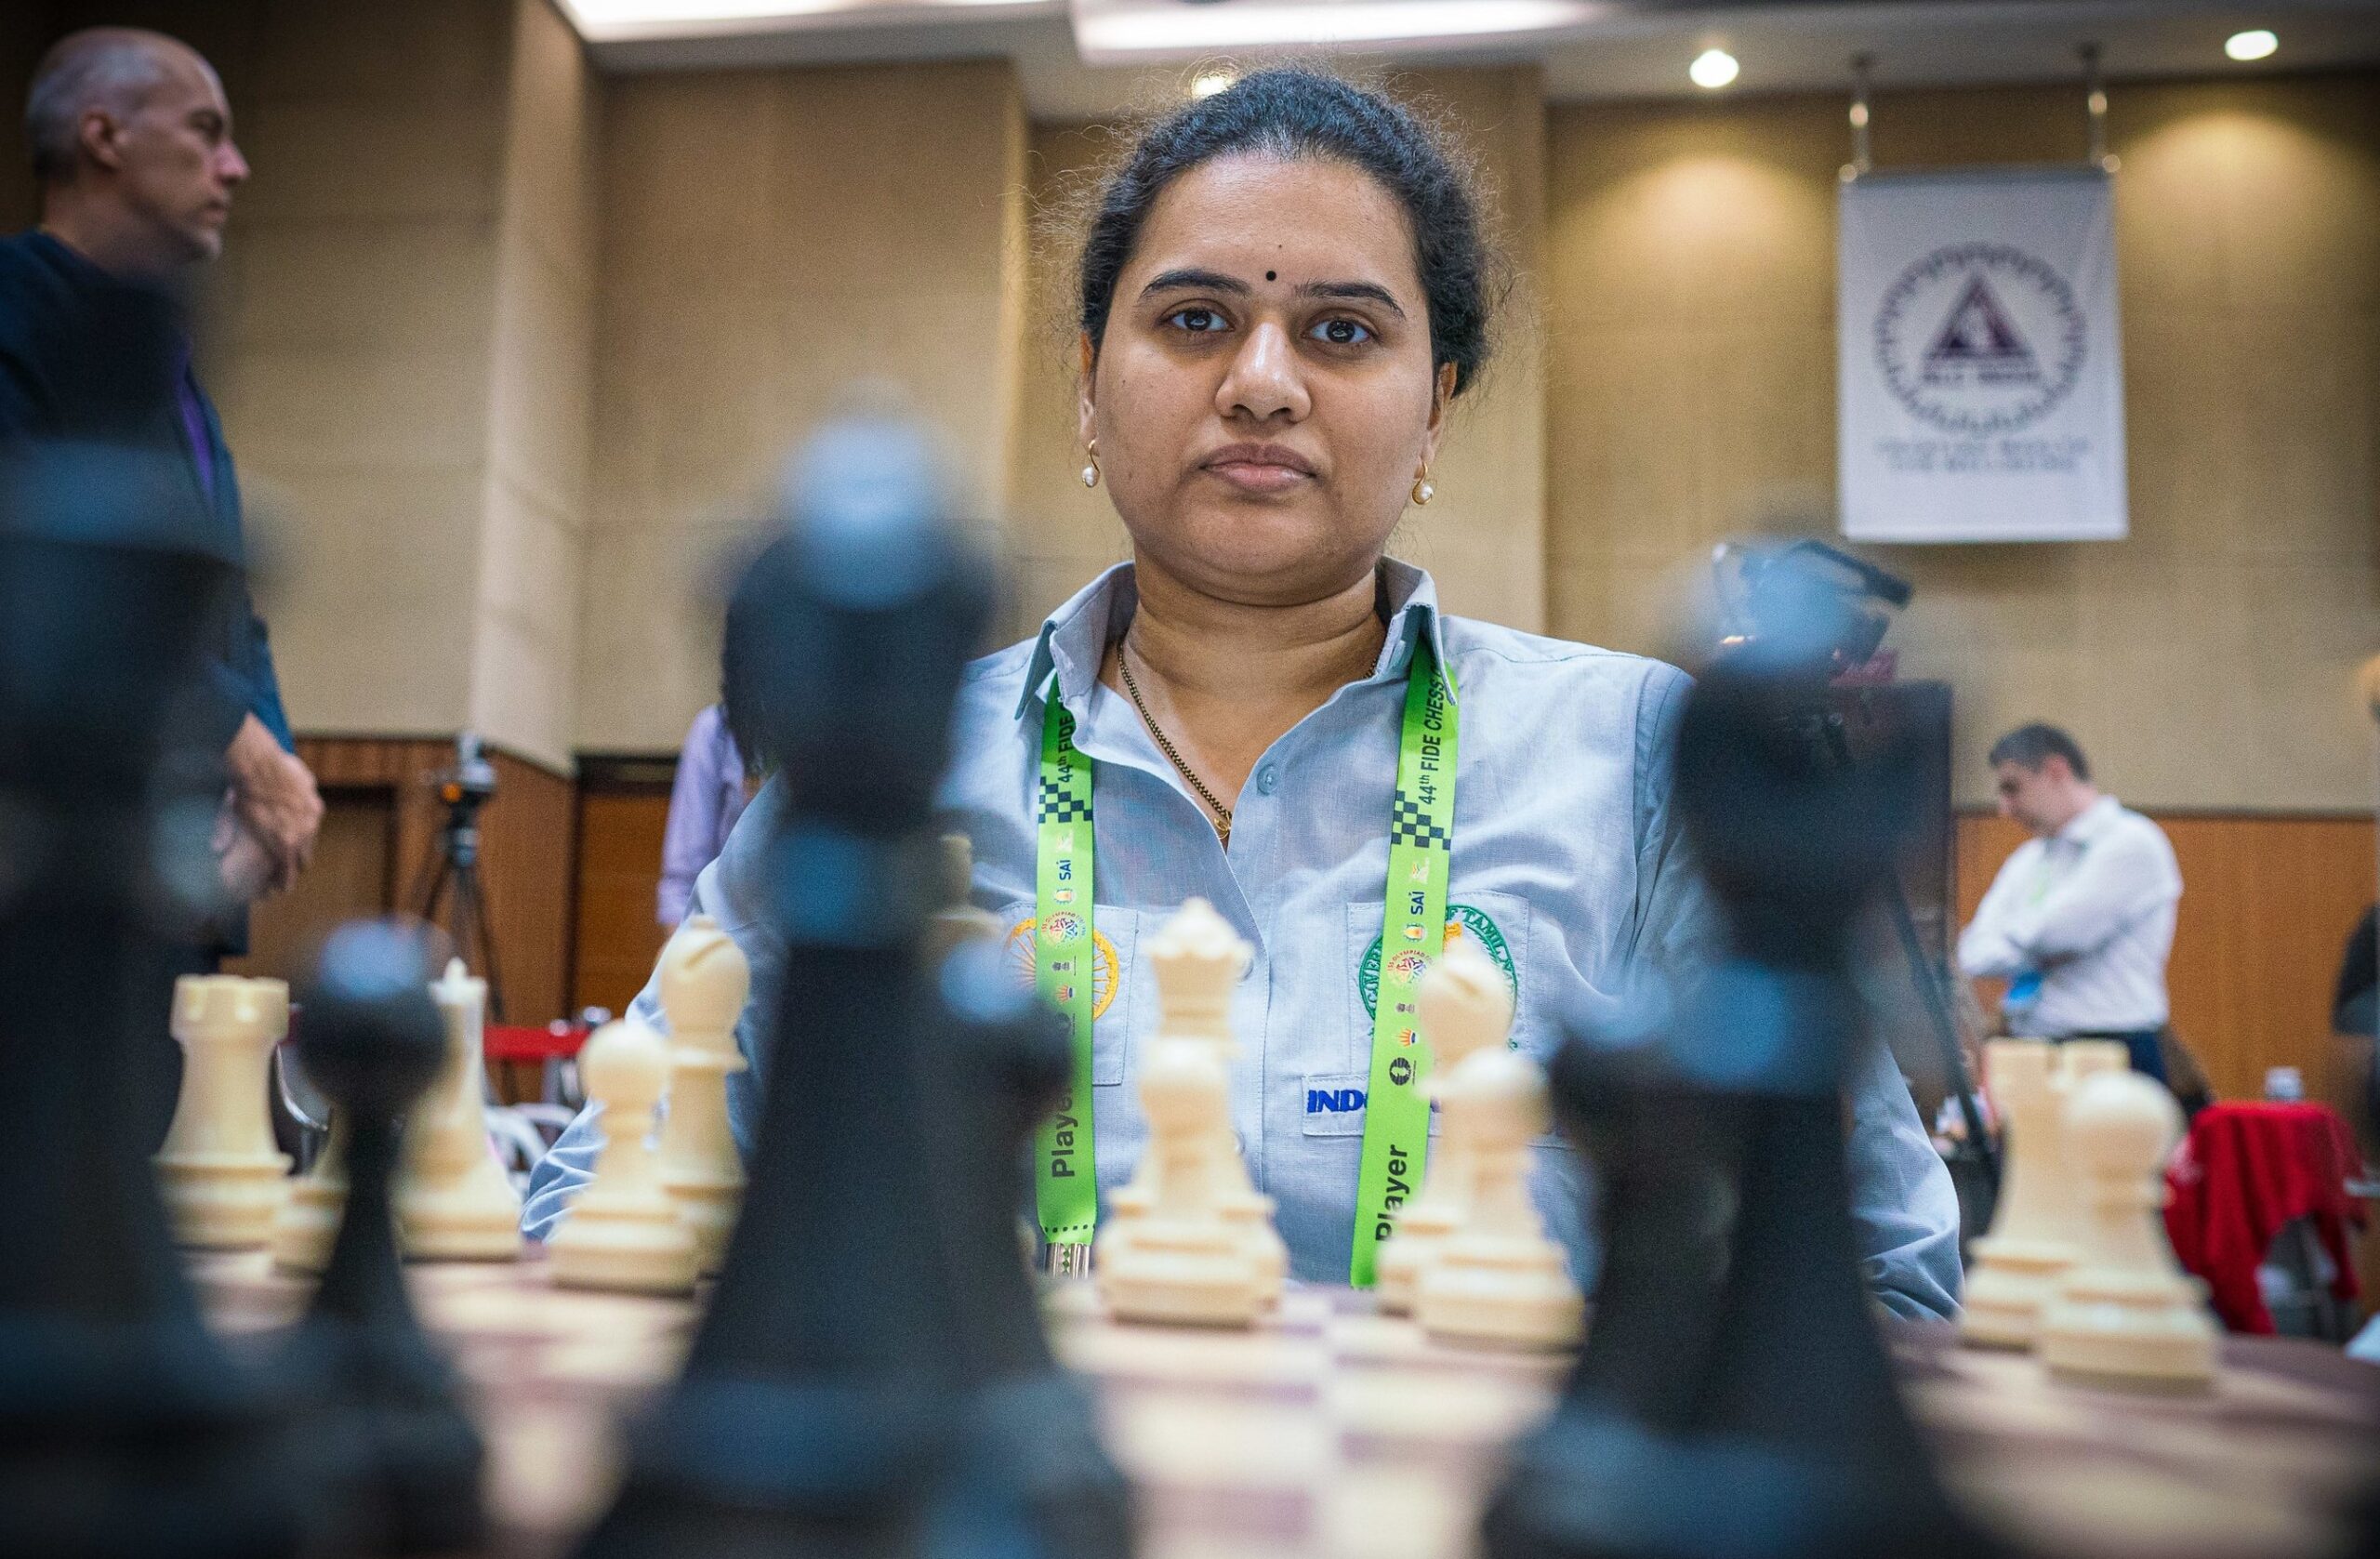 44th Chess Olympiad ends; India's men & women team win bronze medal